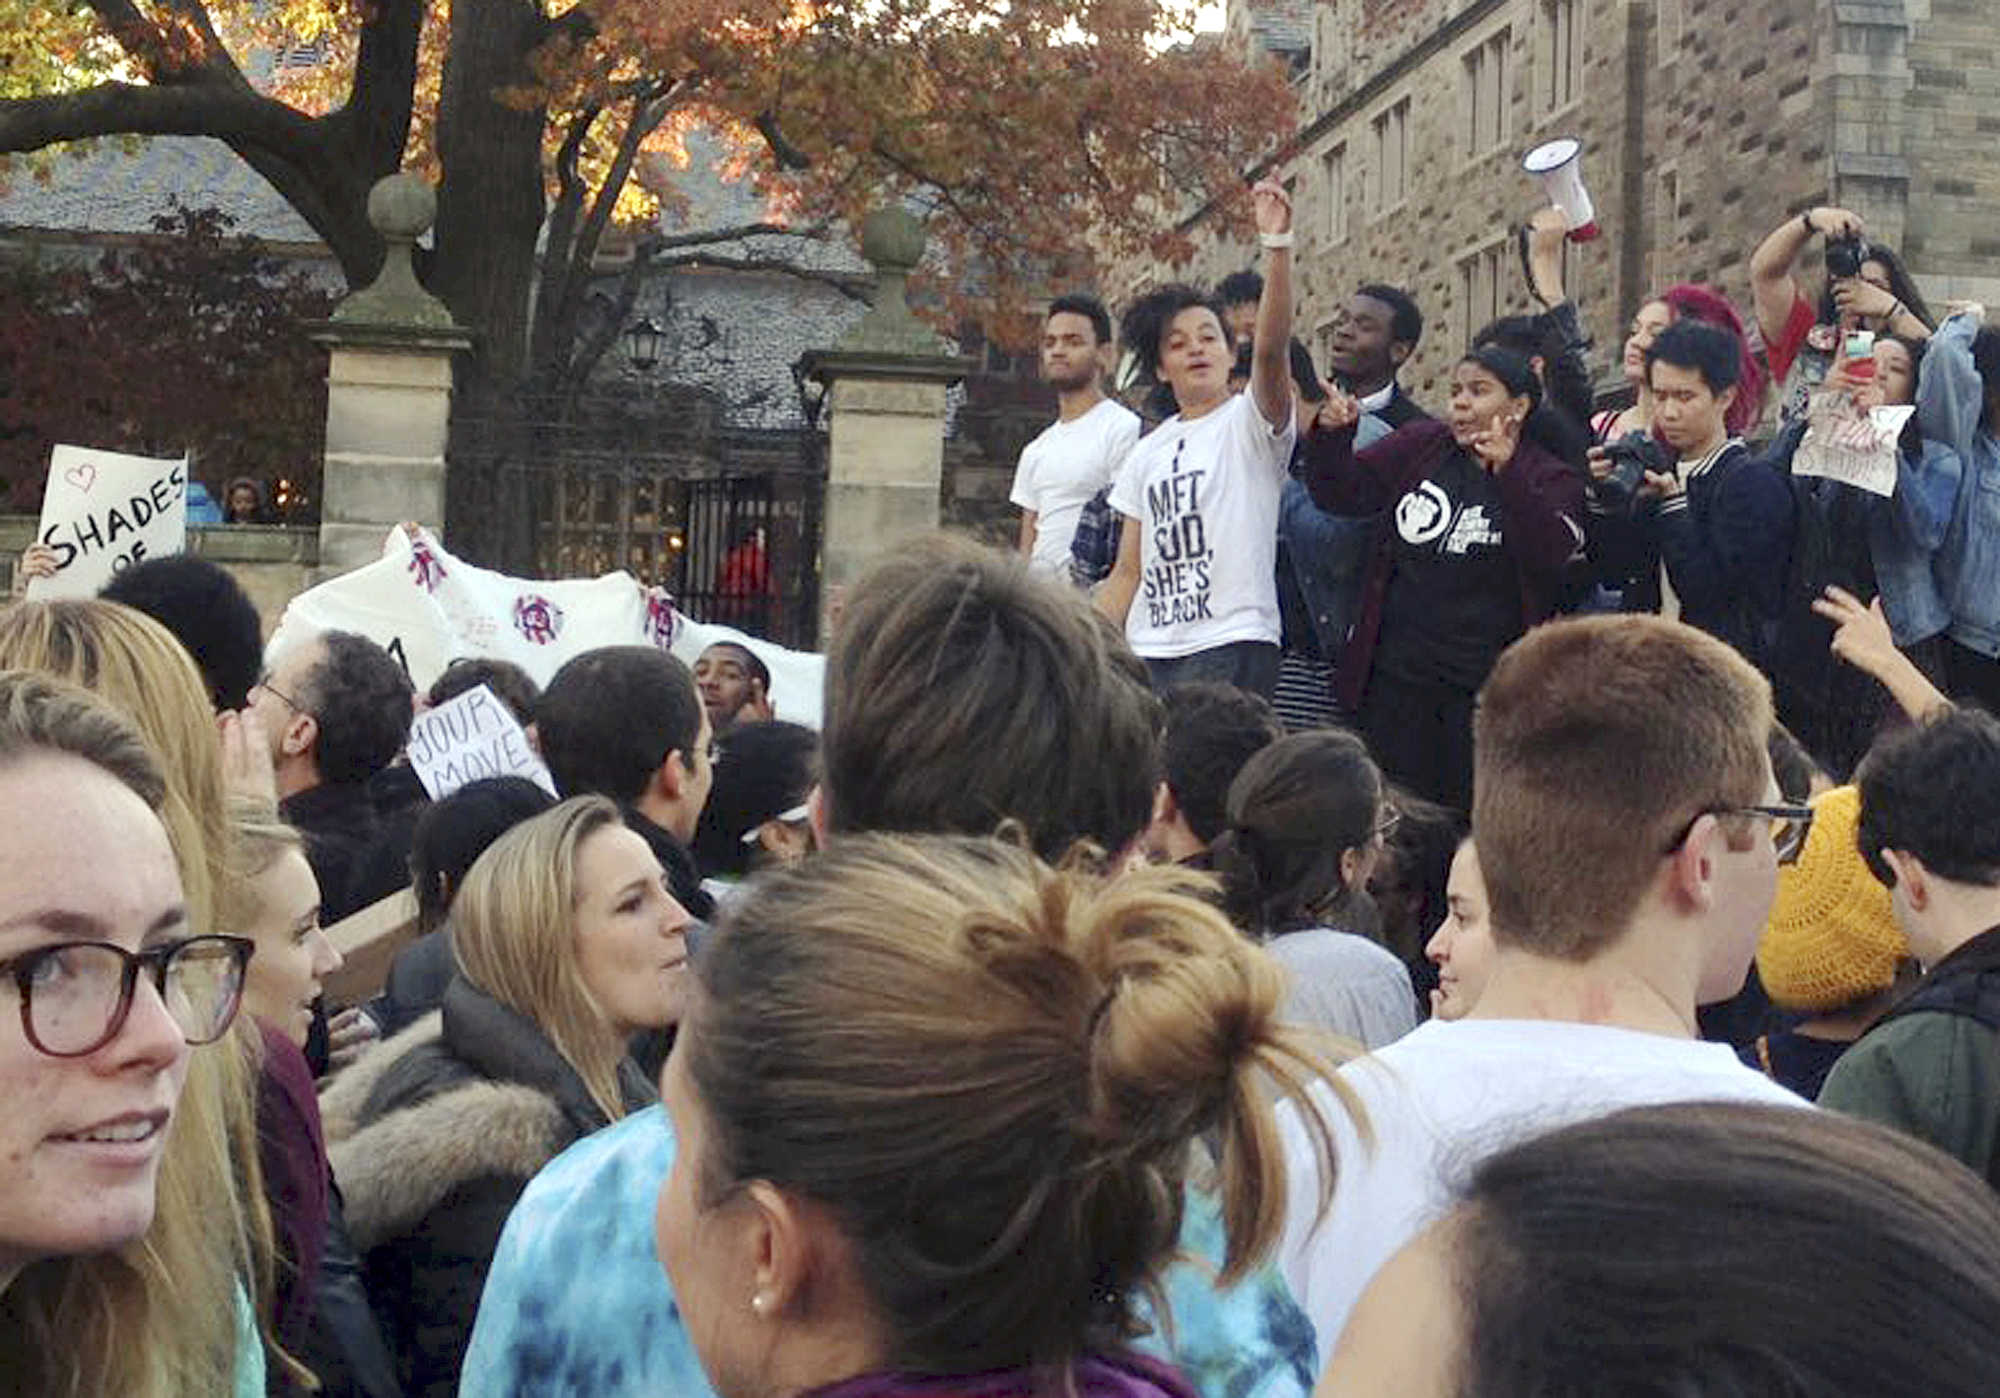 Yale University students and supporters participate in a march across campus to demonstrate against what they see as racial insensitivity at the Ivy League school in New Haven, CT on Nov. 9, 2015. (Ryan Flynn—AP)